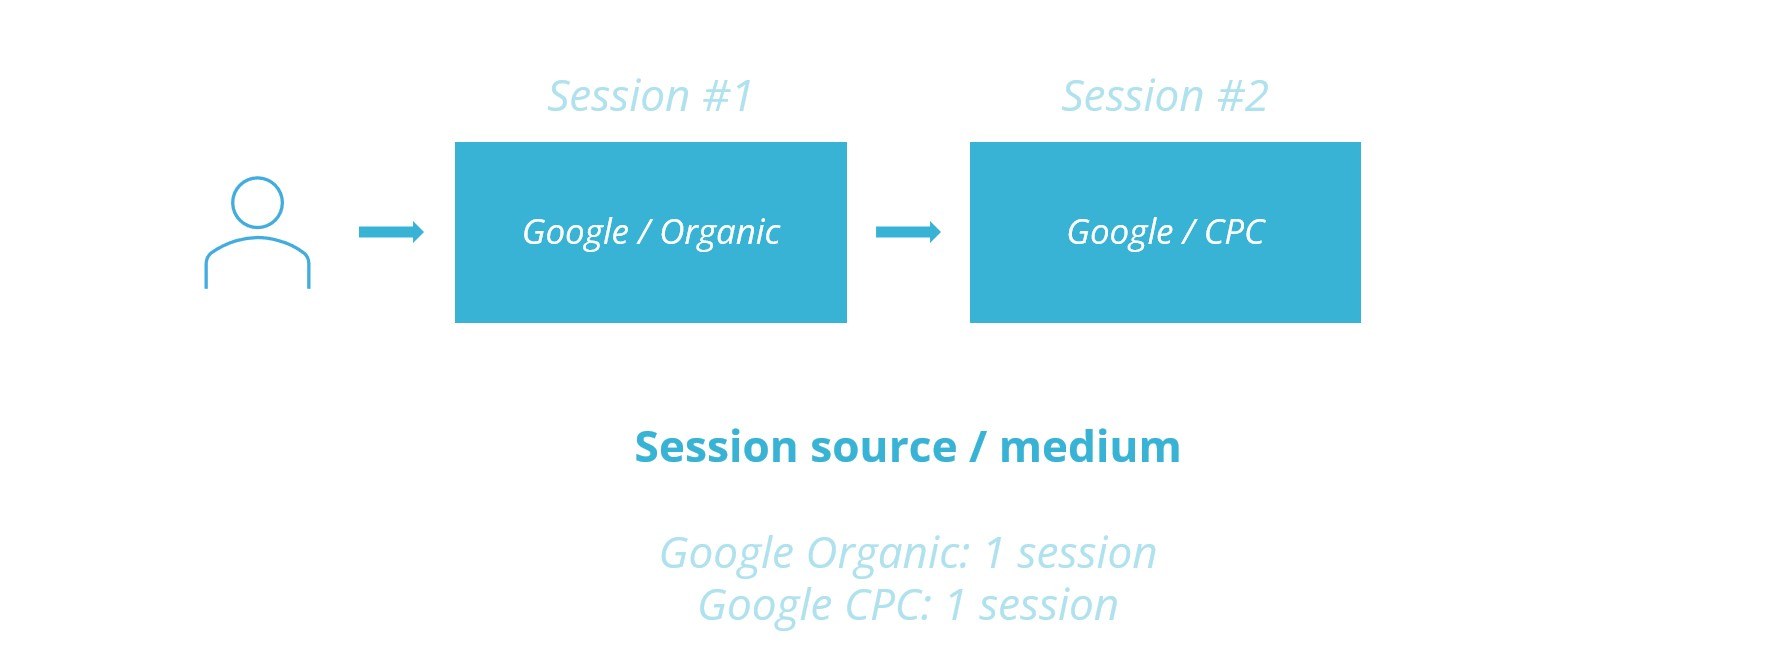 Google analytics 4 traffic acquisition session definition image